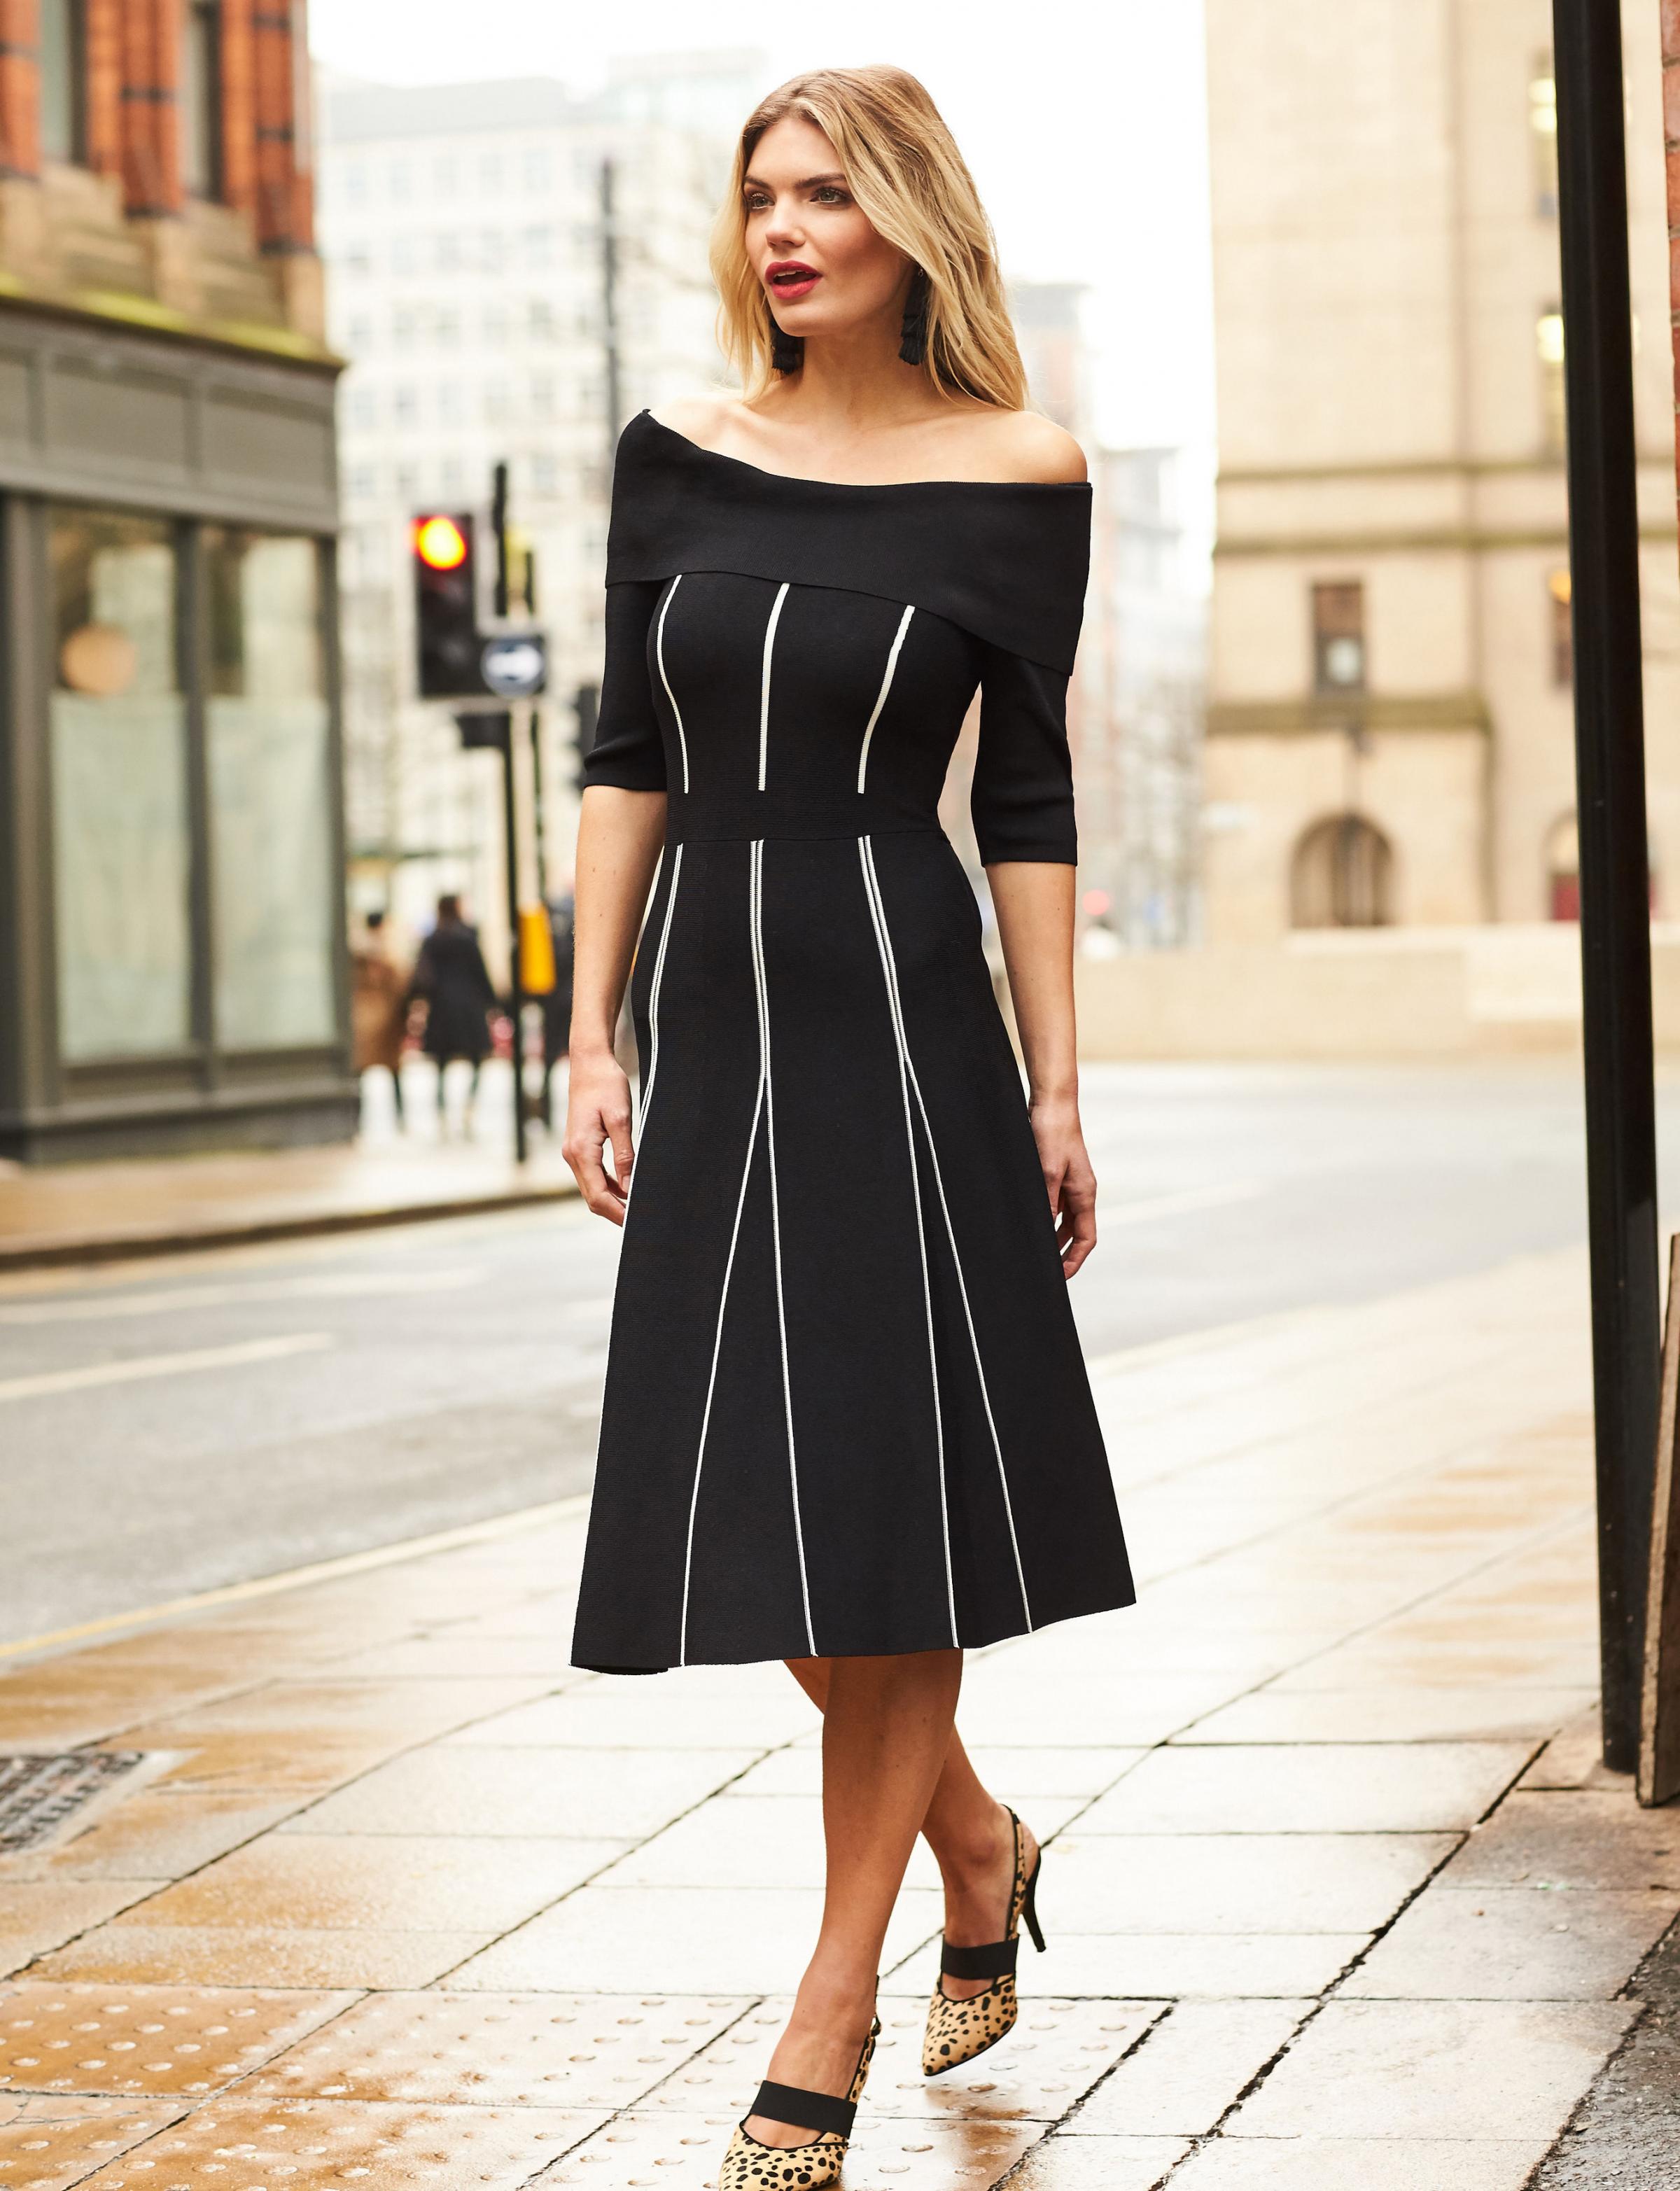 cocktail dresses for over 50s uk